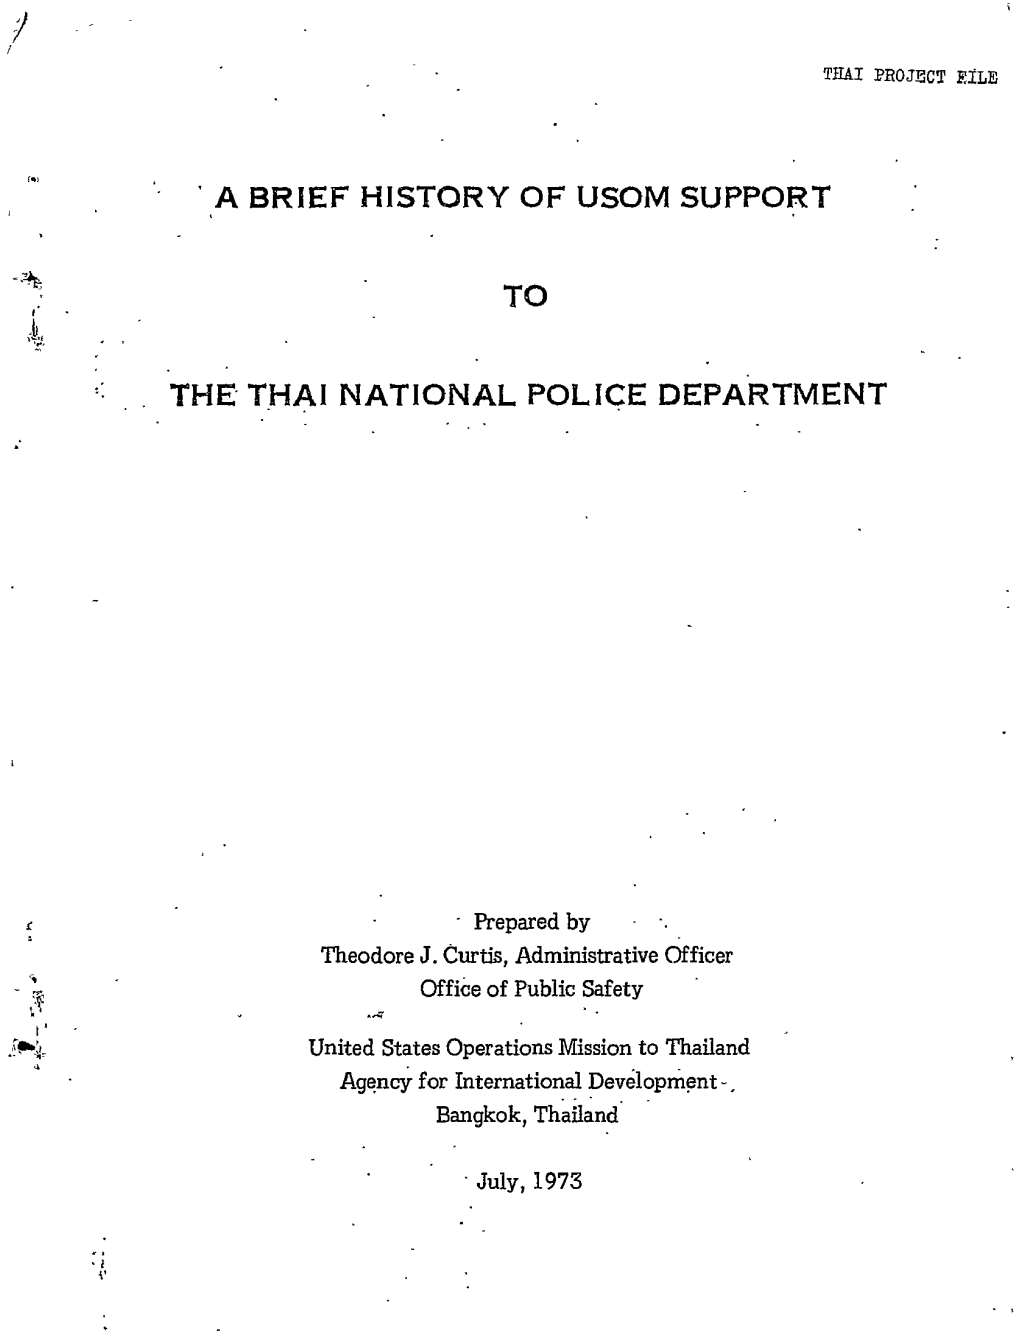 'A Brief History of Usom Support to the Thai National Police Department